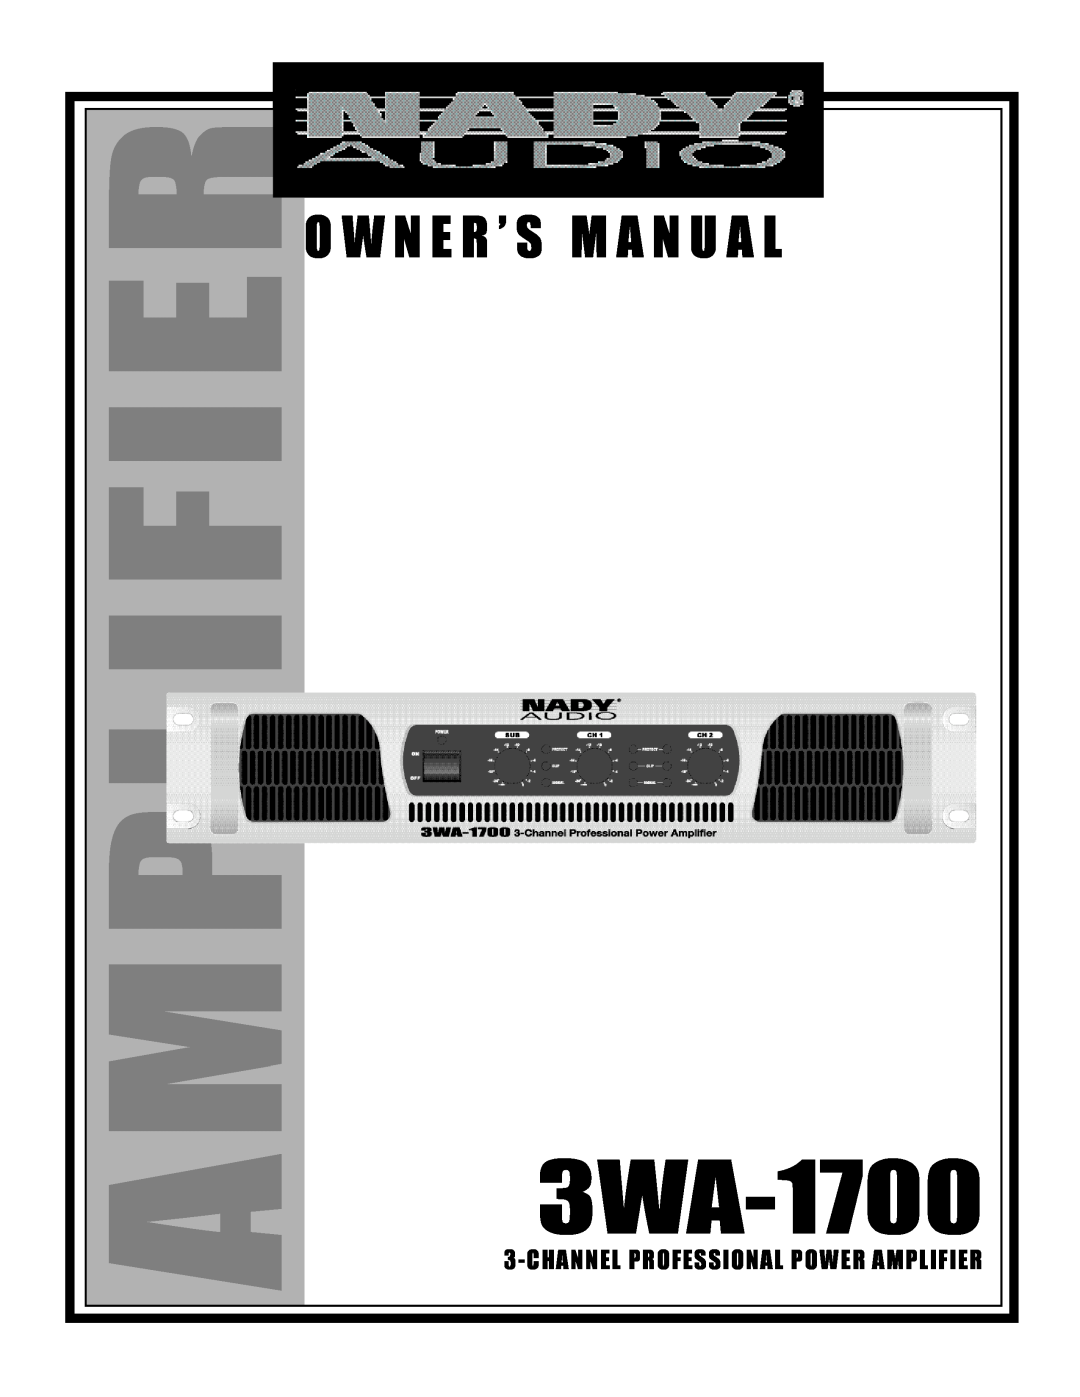 Nady Systems 3WA1700 owner manual 3WA-1700, Channelprofessional Power Amplifier 